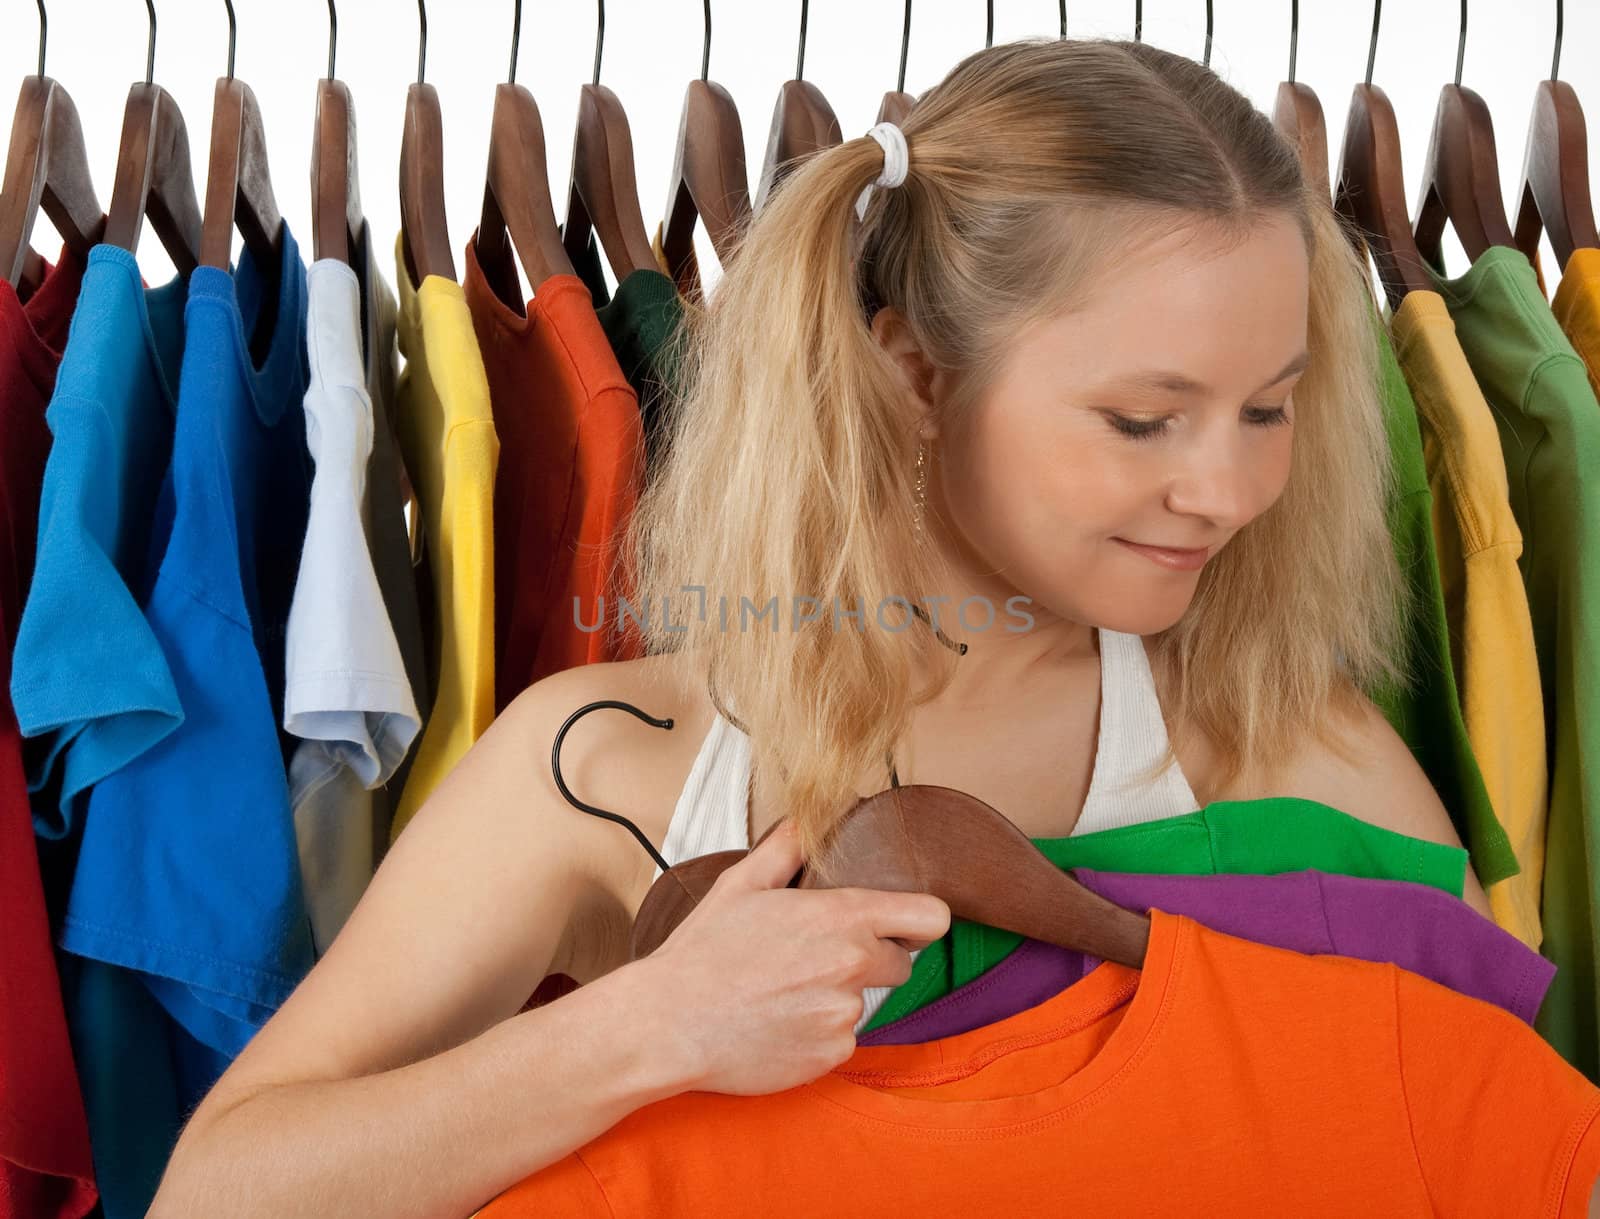 Girl choosing clothes in a store by anikasalsera